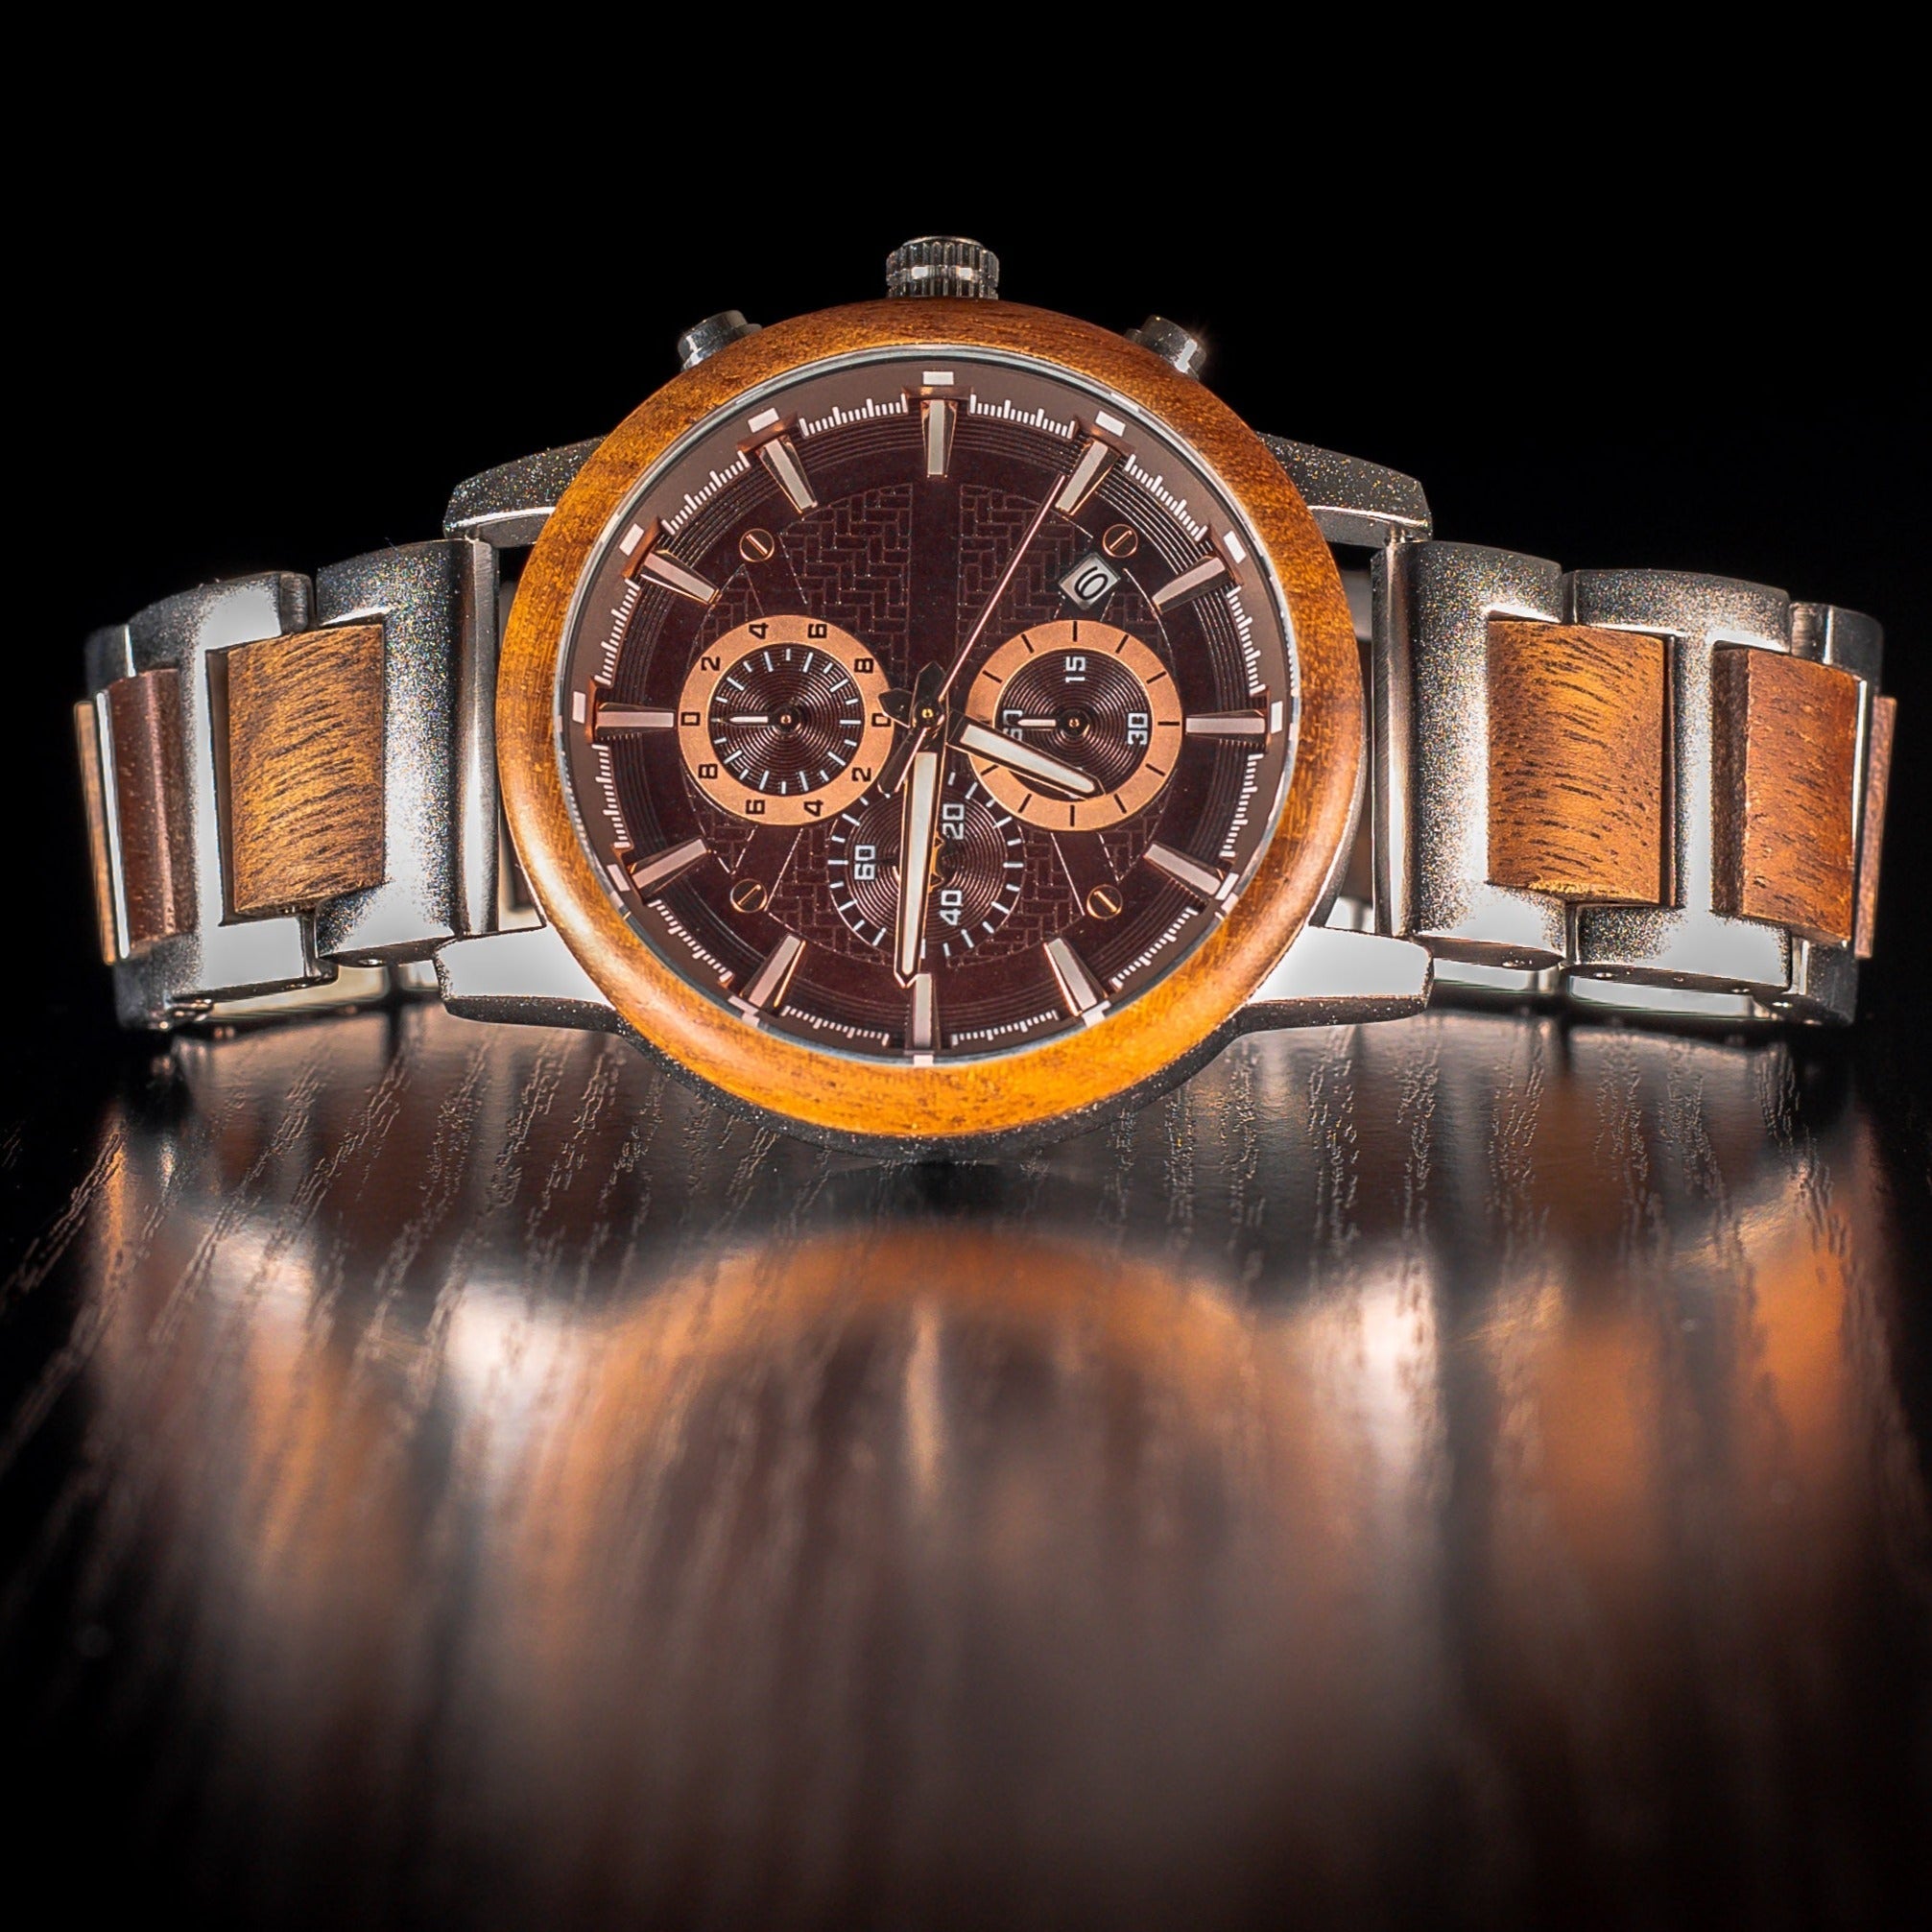 Storm - Walnut & Brushed Stainless Steel Watch